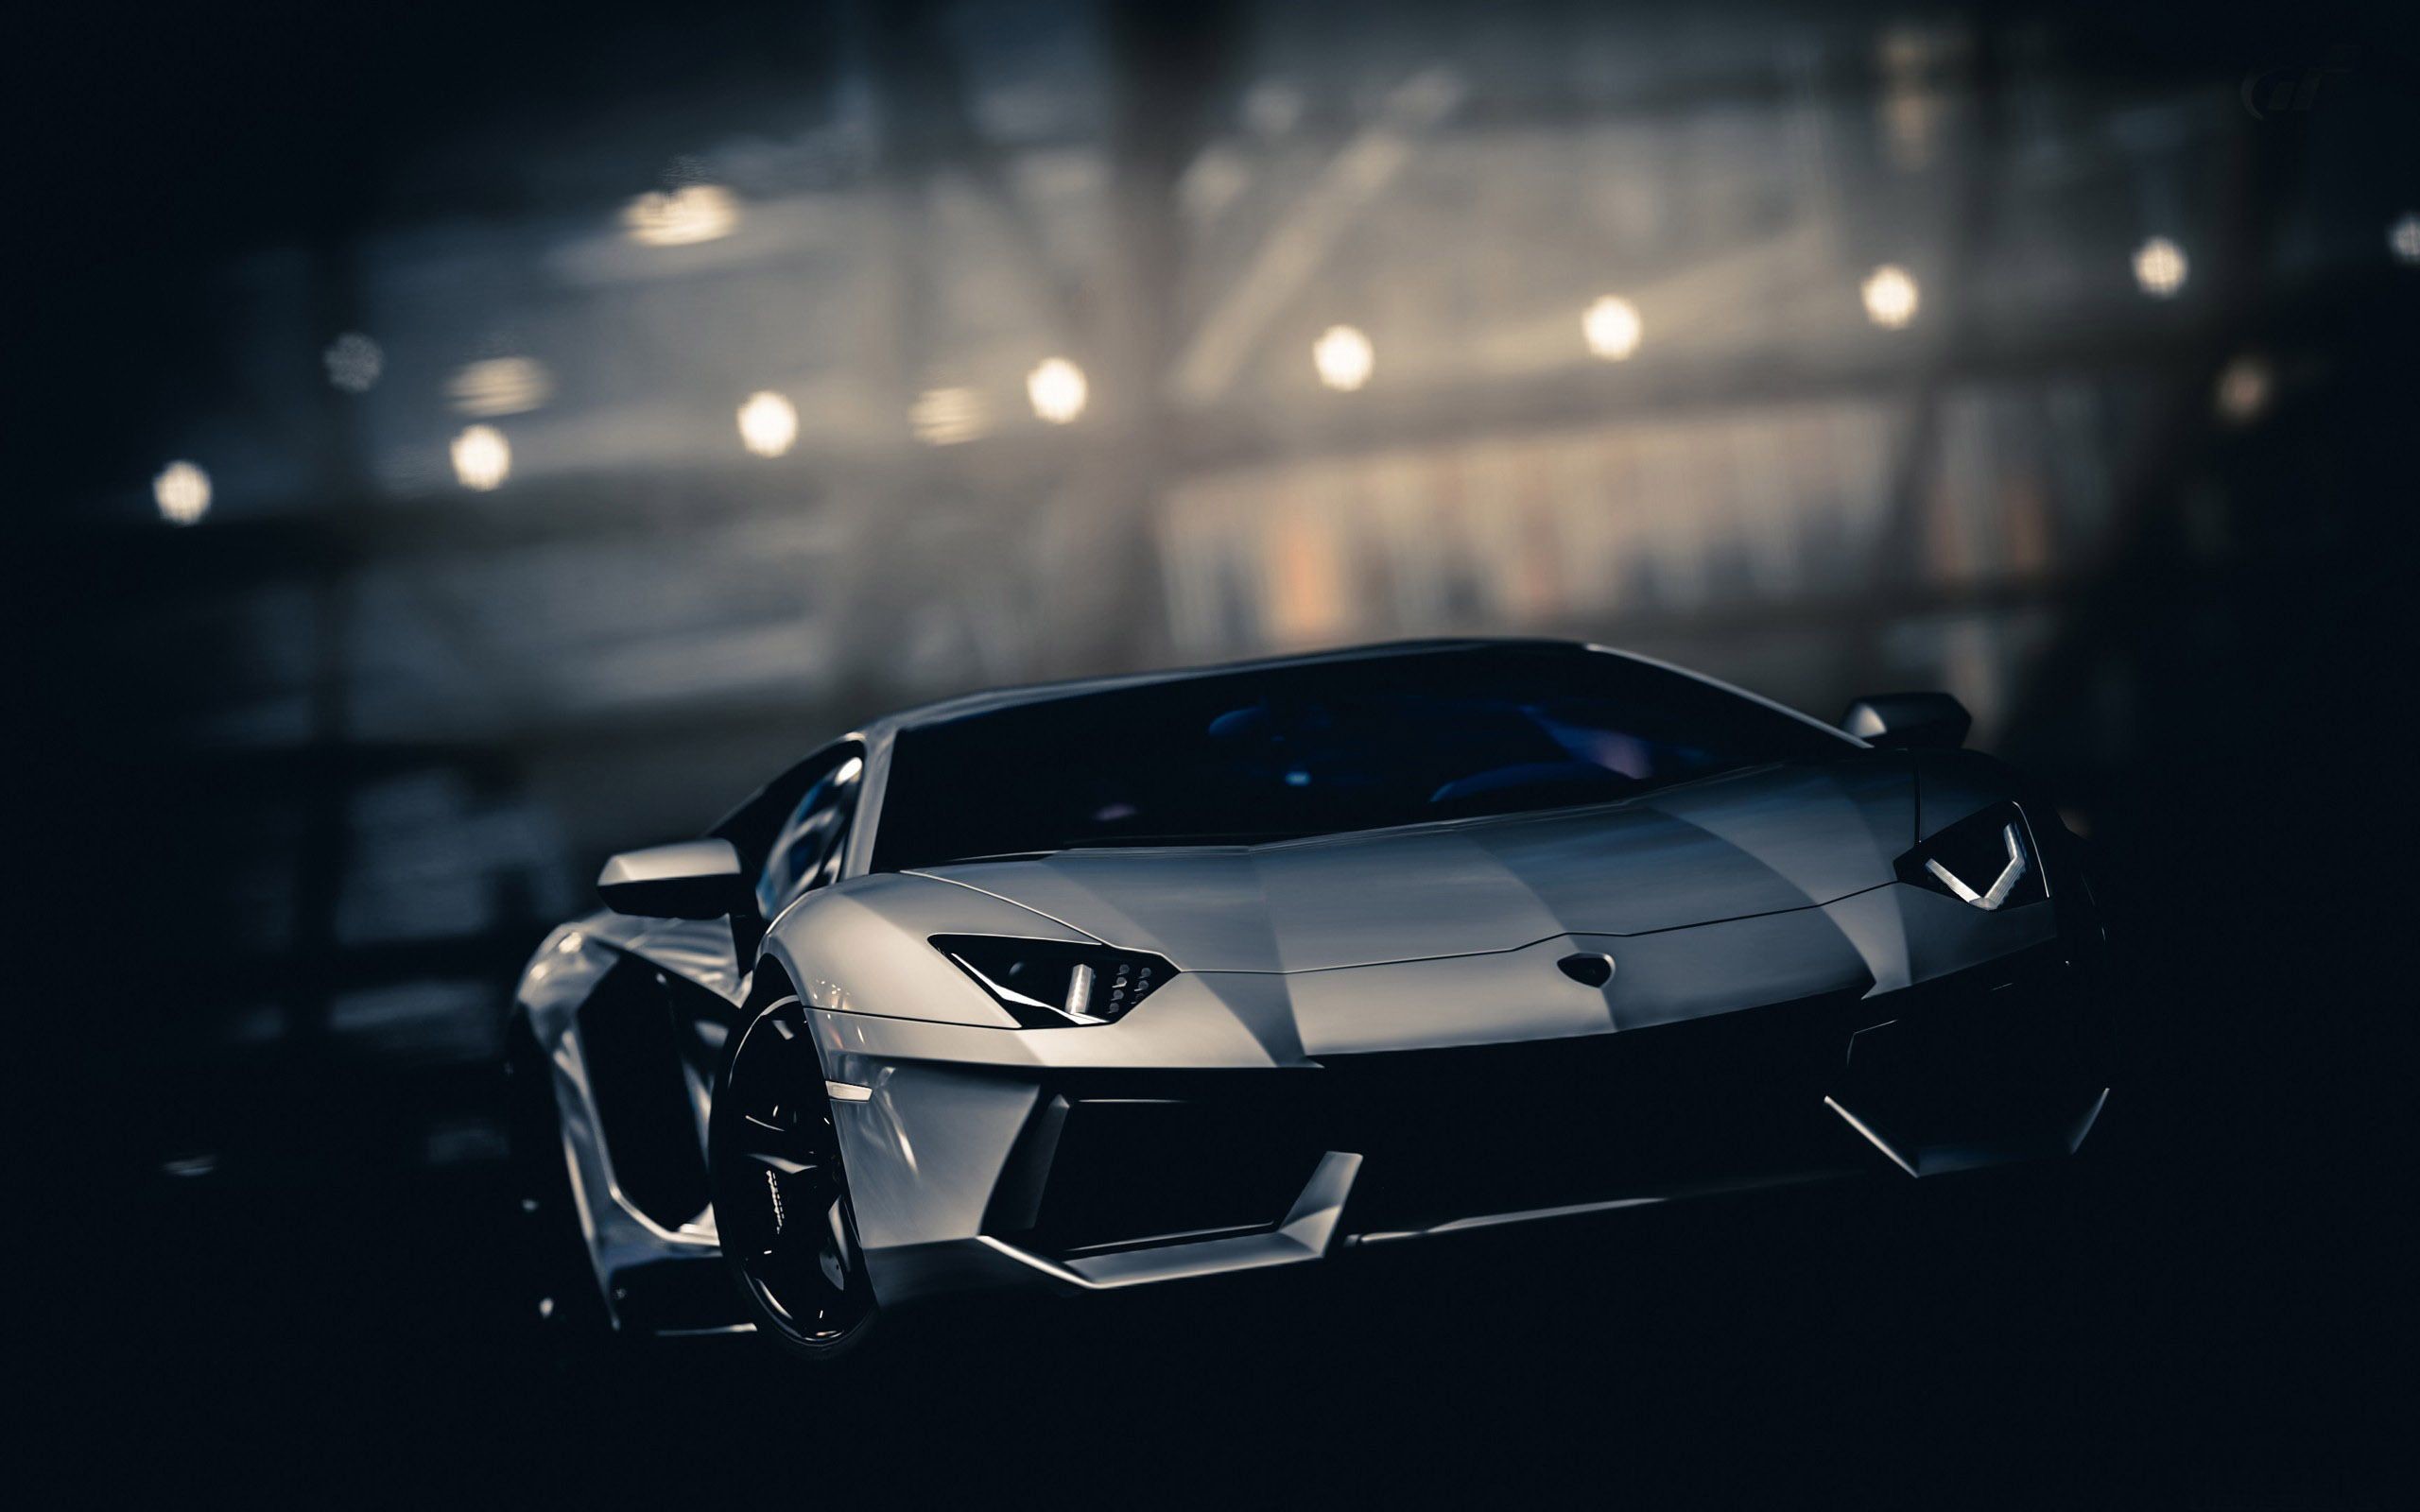 2560x1600 Lamborghini Wallpaper Hd 1080p: You can get gorgeous wallpapers as like  “love, nature, sports, fashion, quotes, loneliness, amazing, etc.